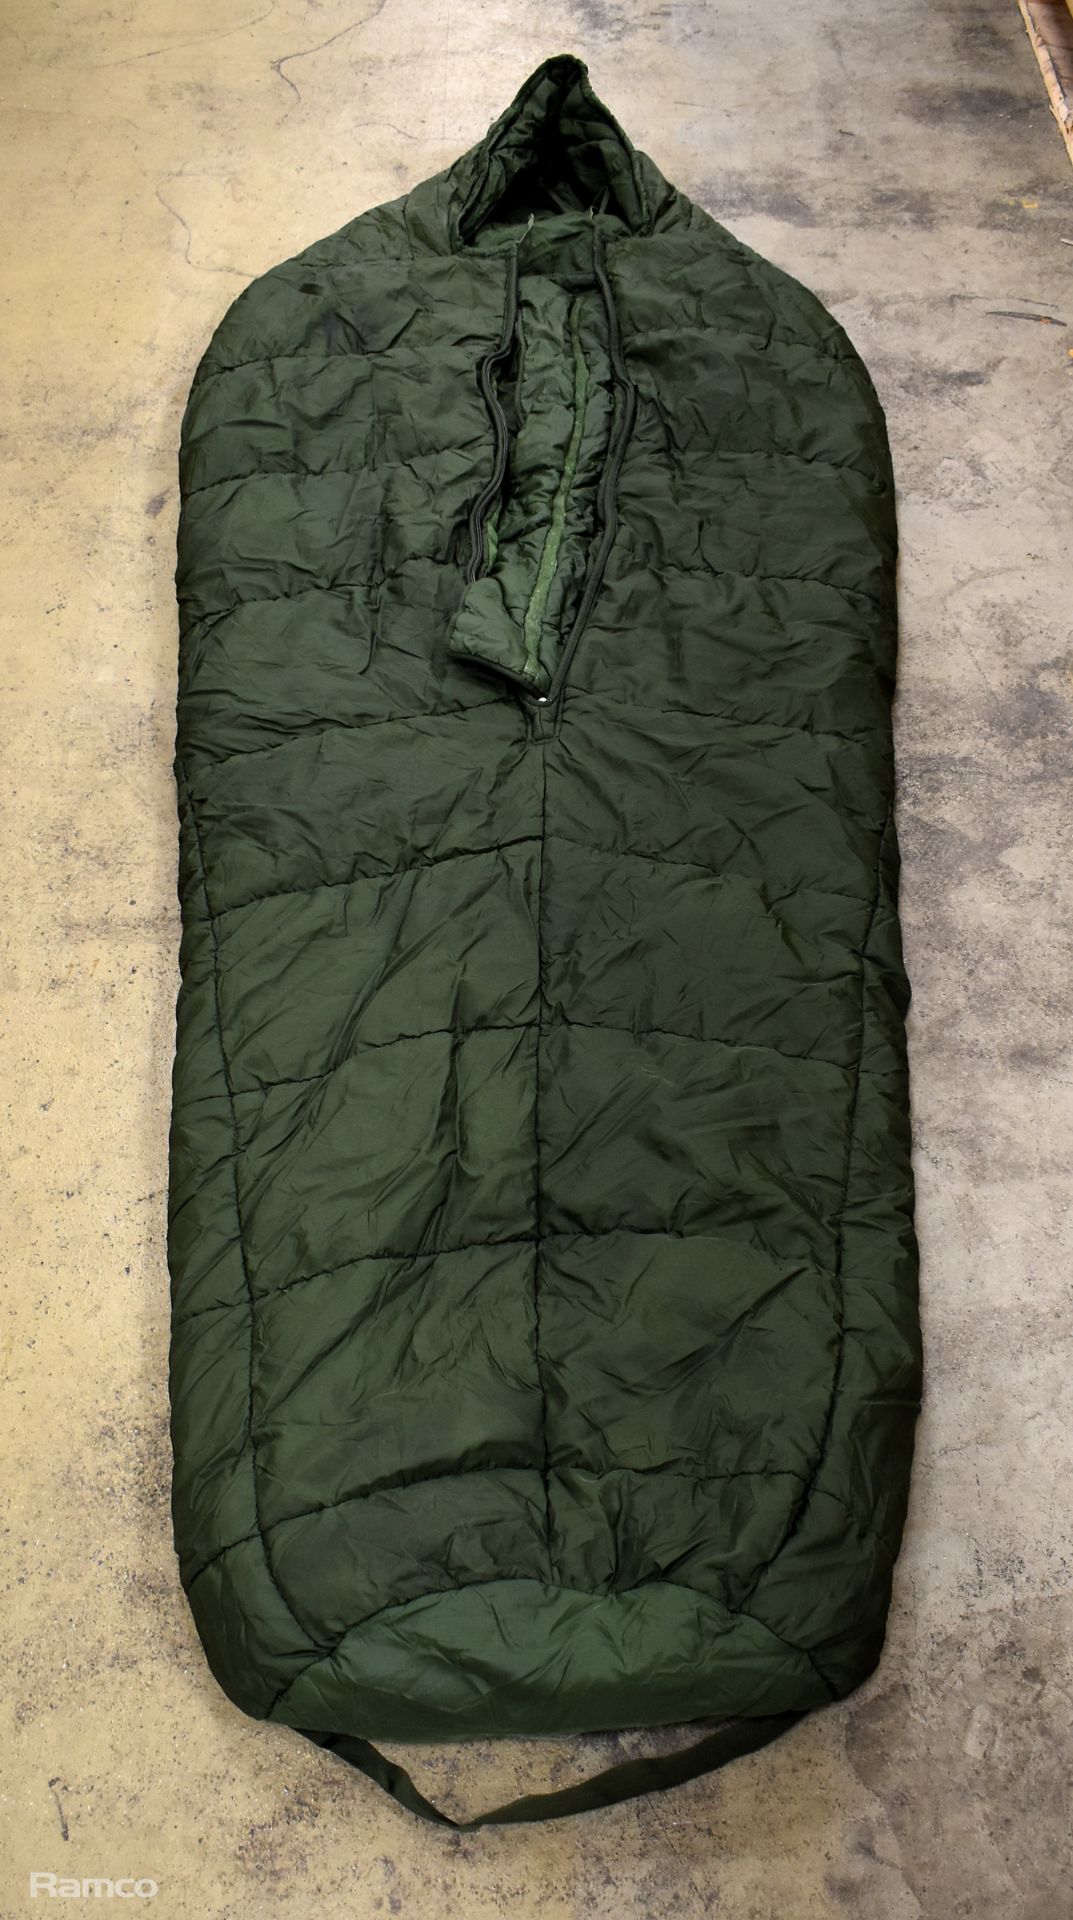 30x Sleeping bags - mixed grades and sizes - Image 5 of 8